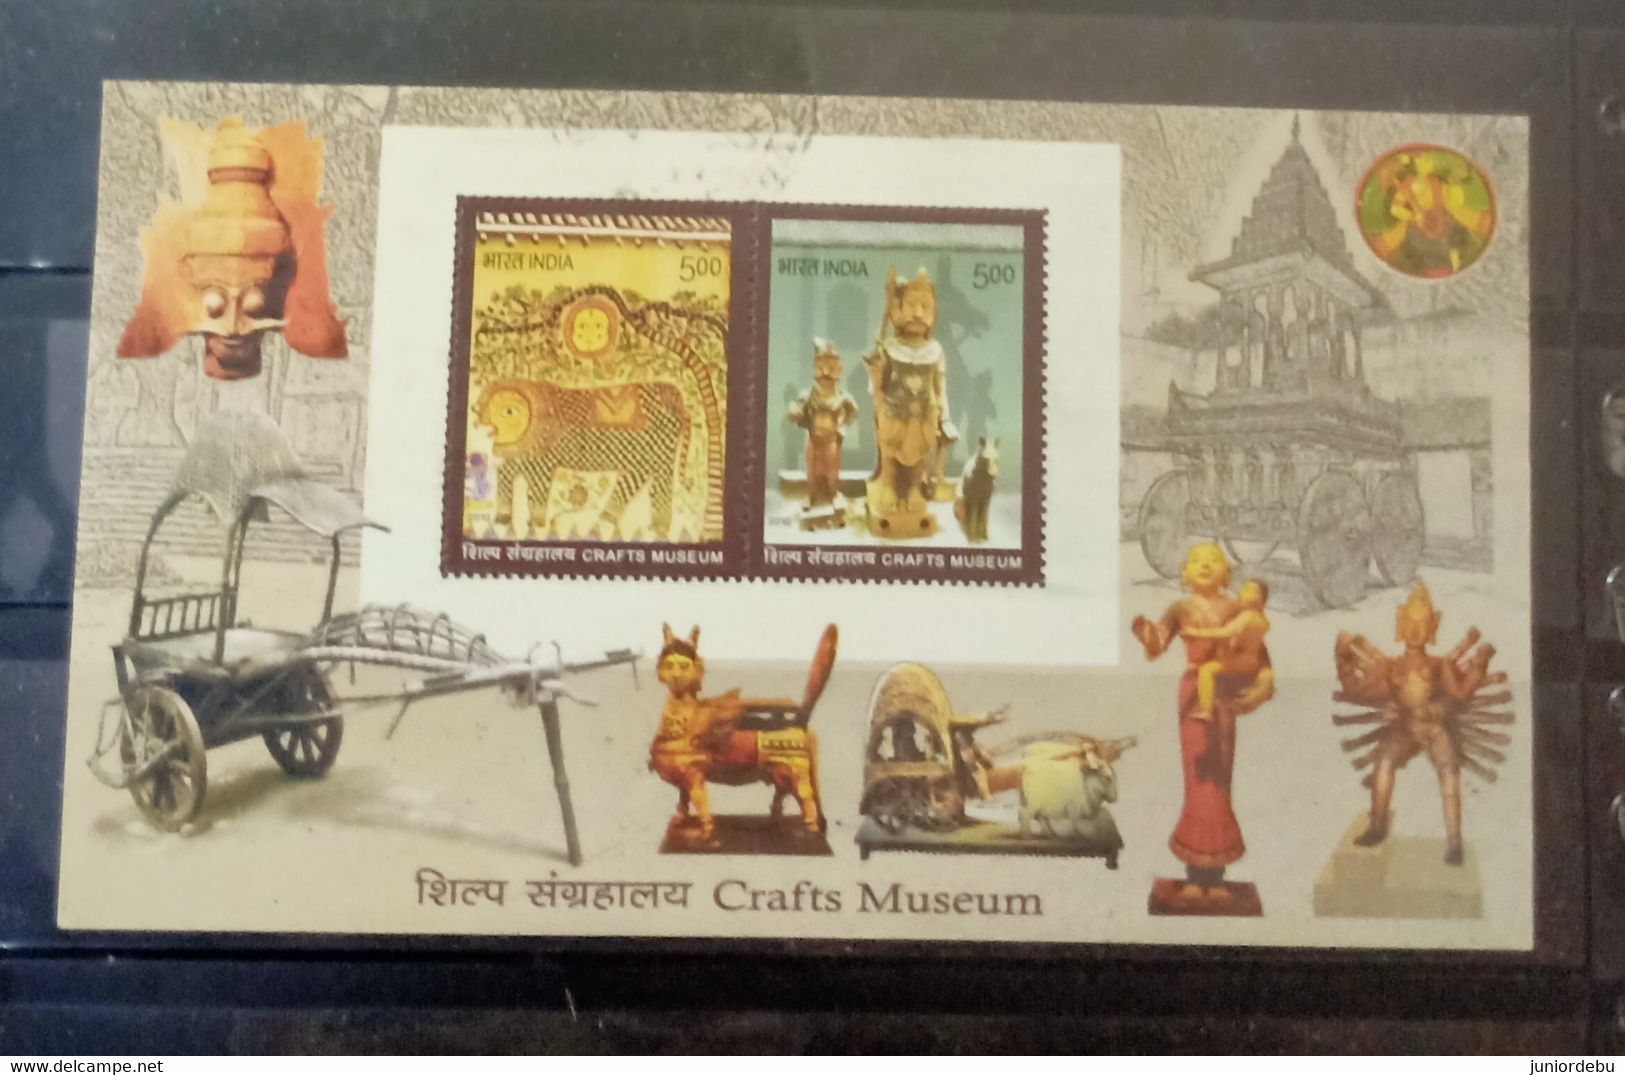 India - 2010 -  Crafts Museum - Miniature Sheet  - Used. Condition As Per Scan. - Used Stamps